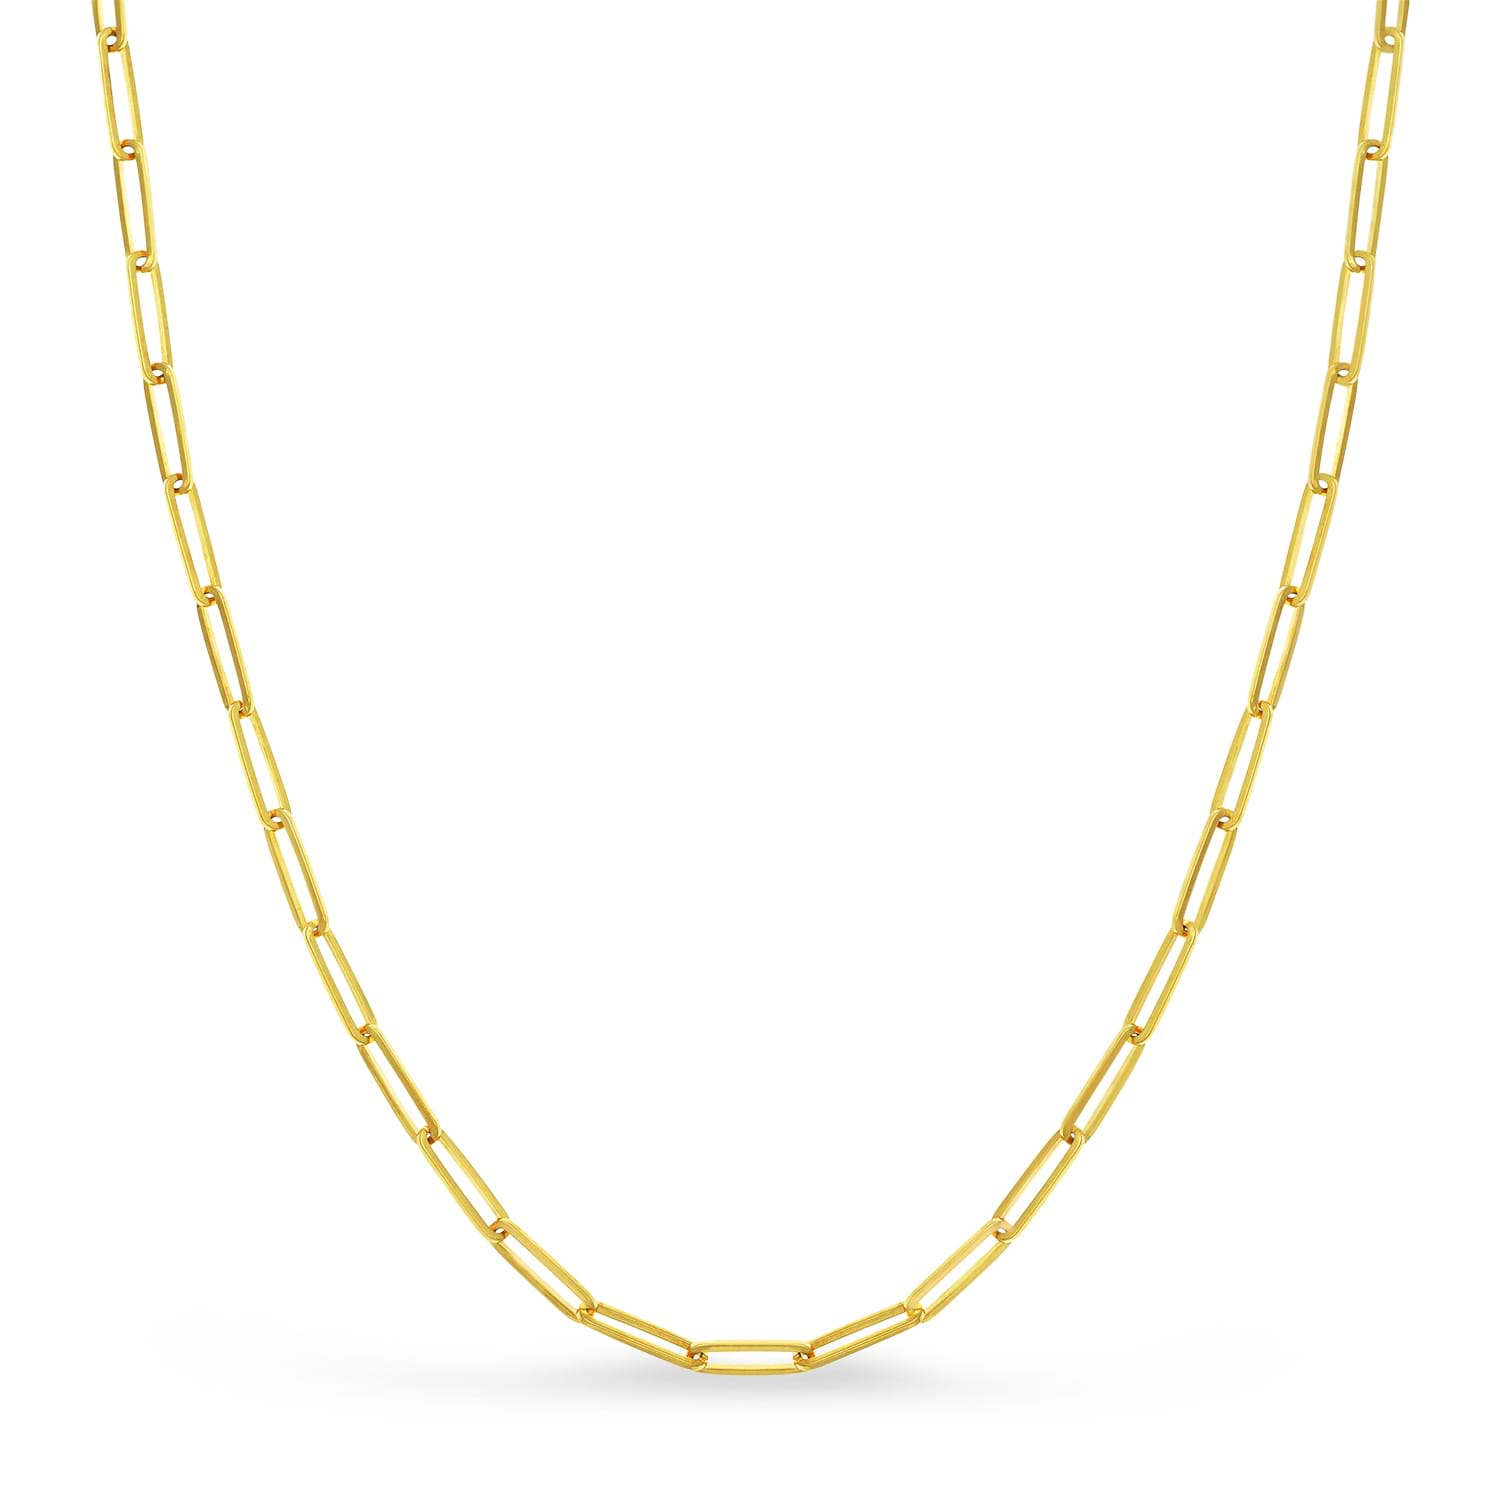 Handmade Elongated Paperclip Link Chain Necklace 14k Yellow Gold